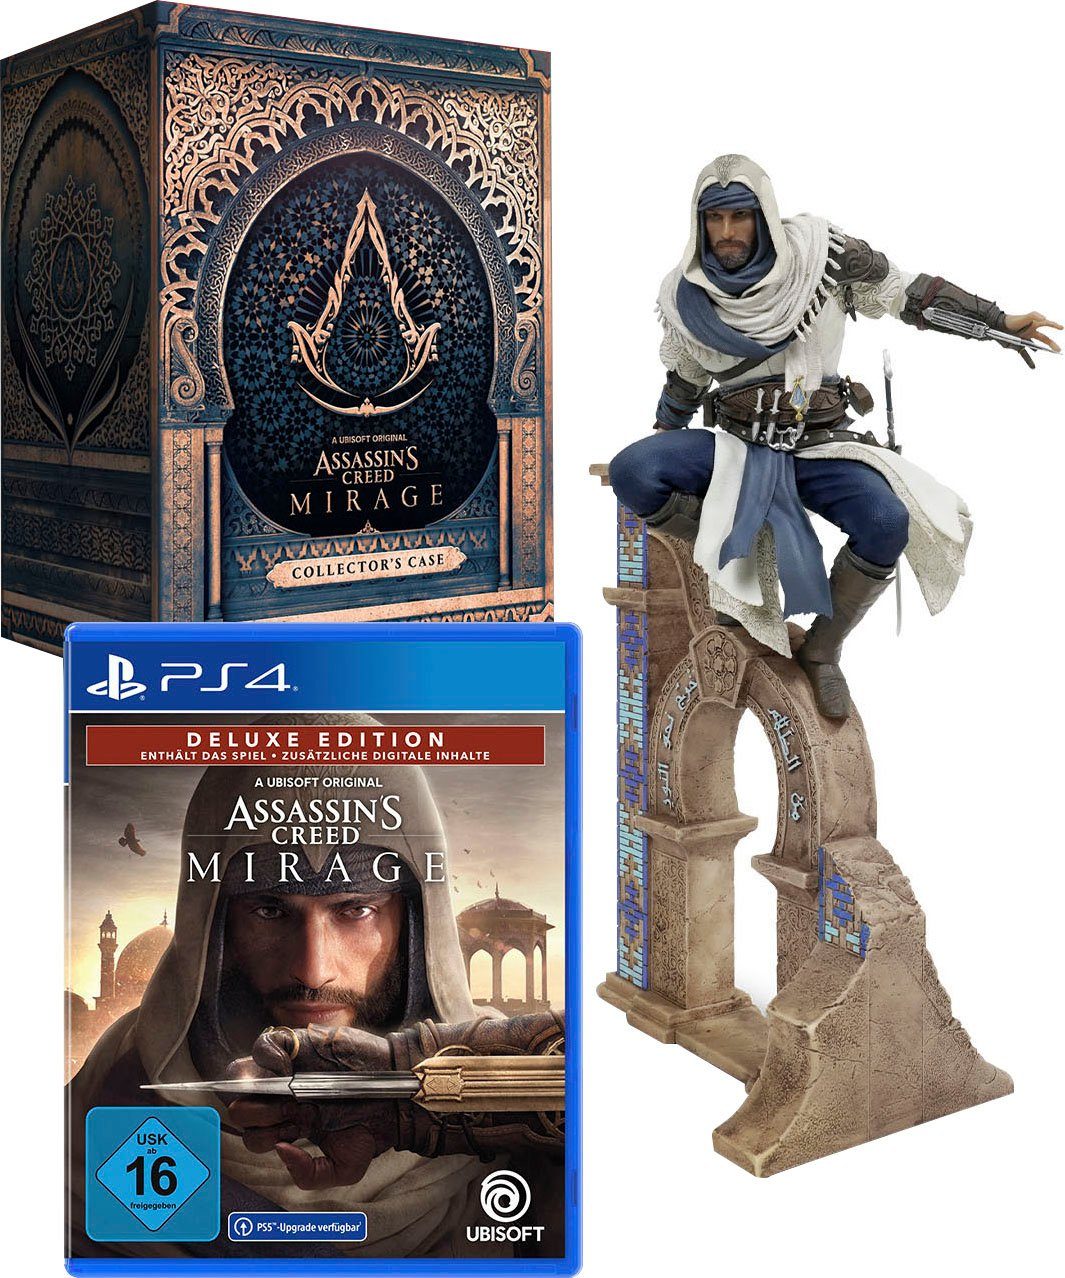 Assassin's Creed Mirage Collector's Edition – PlayStation 4